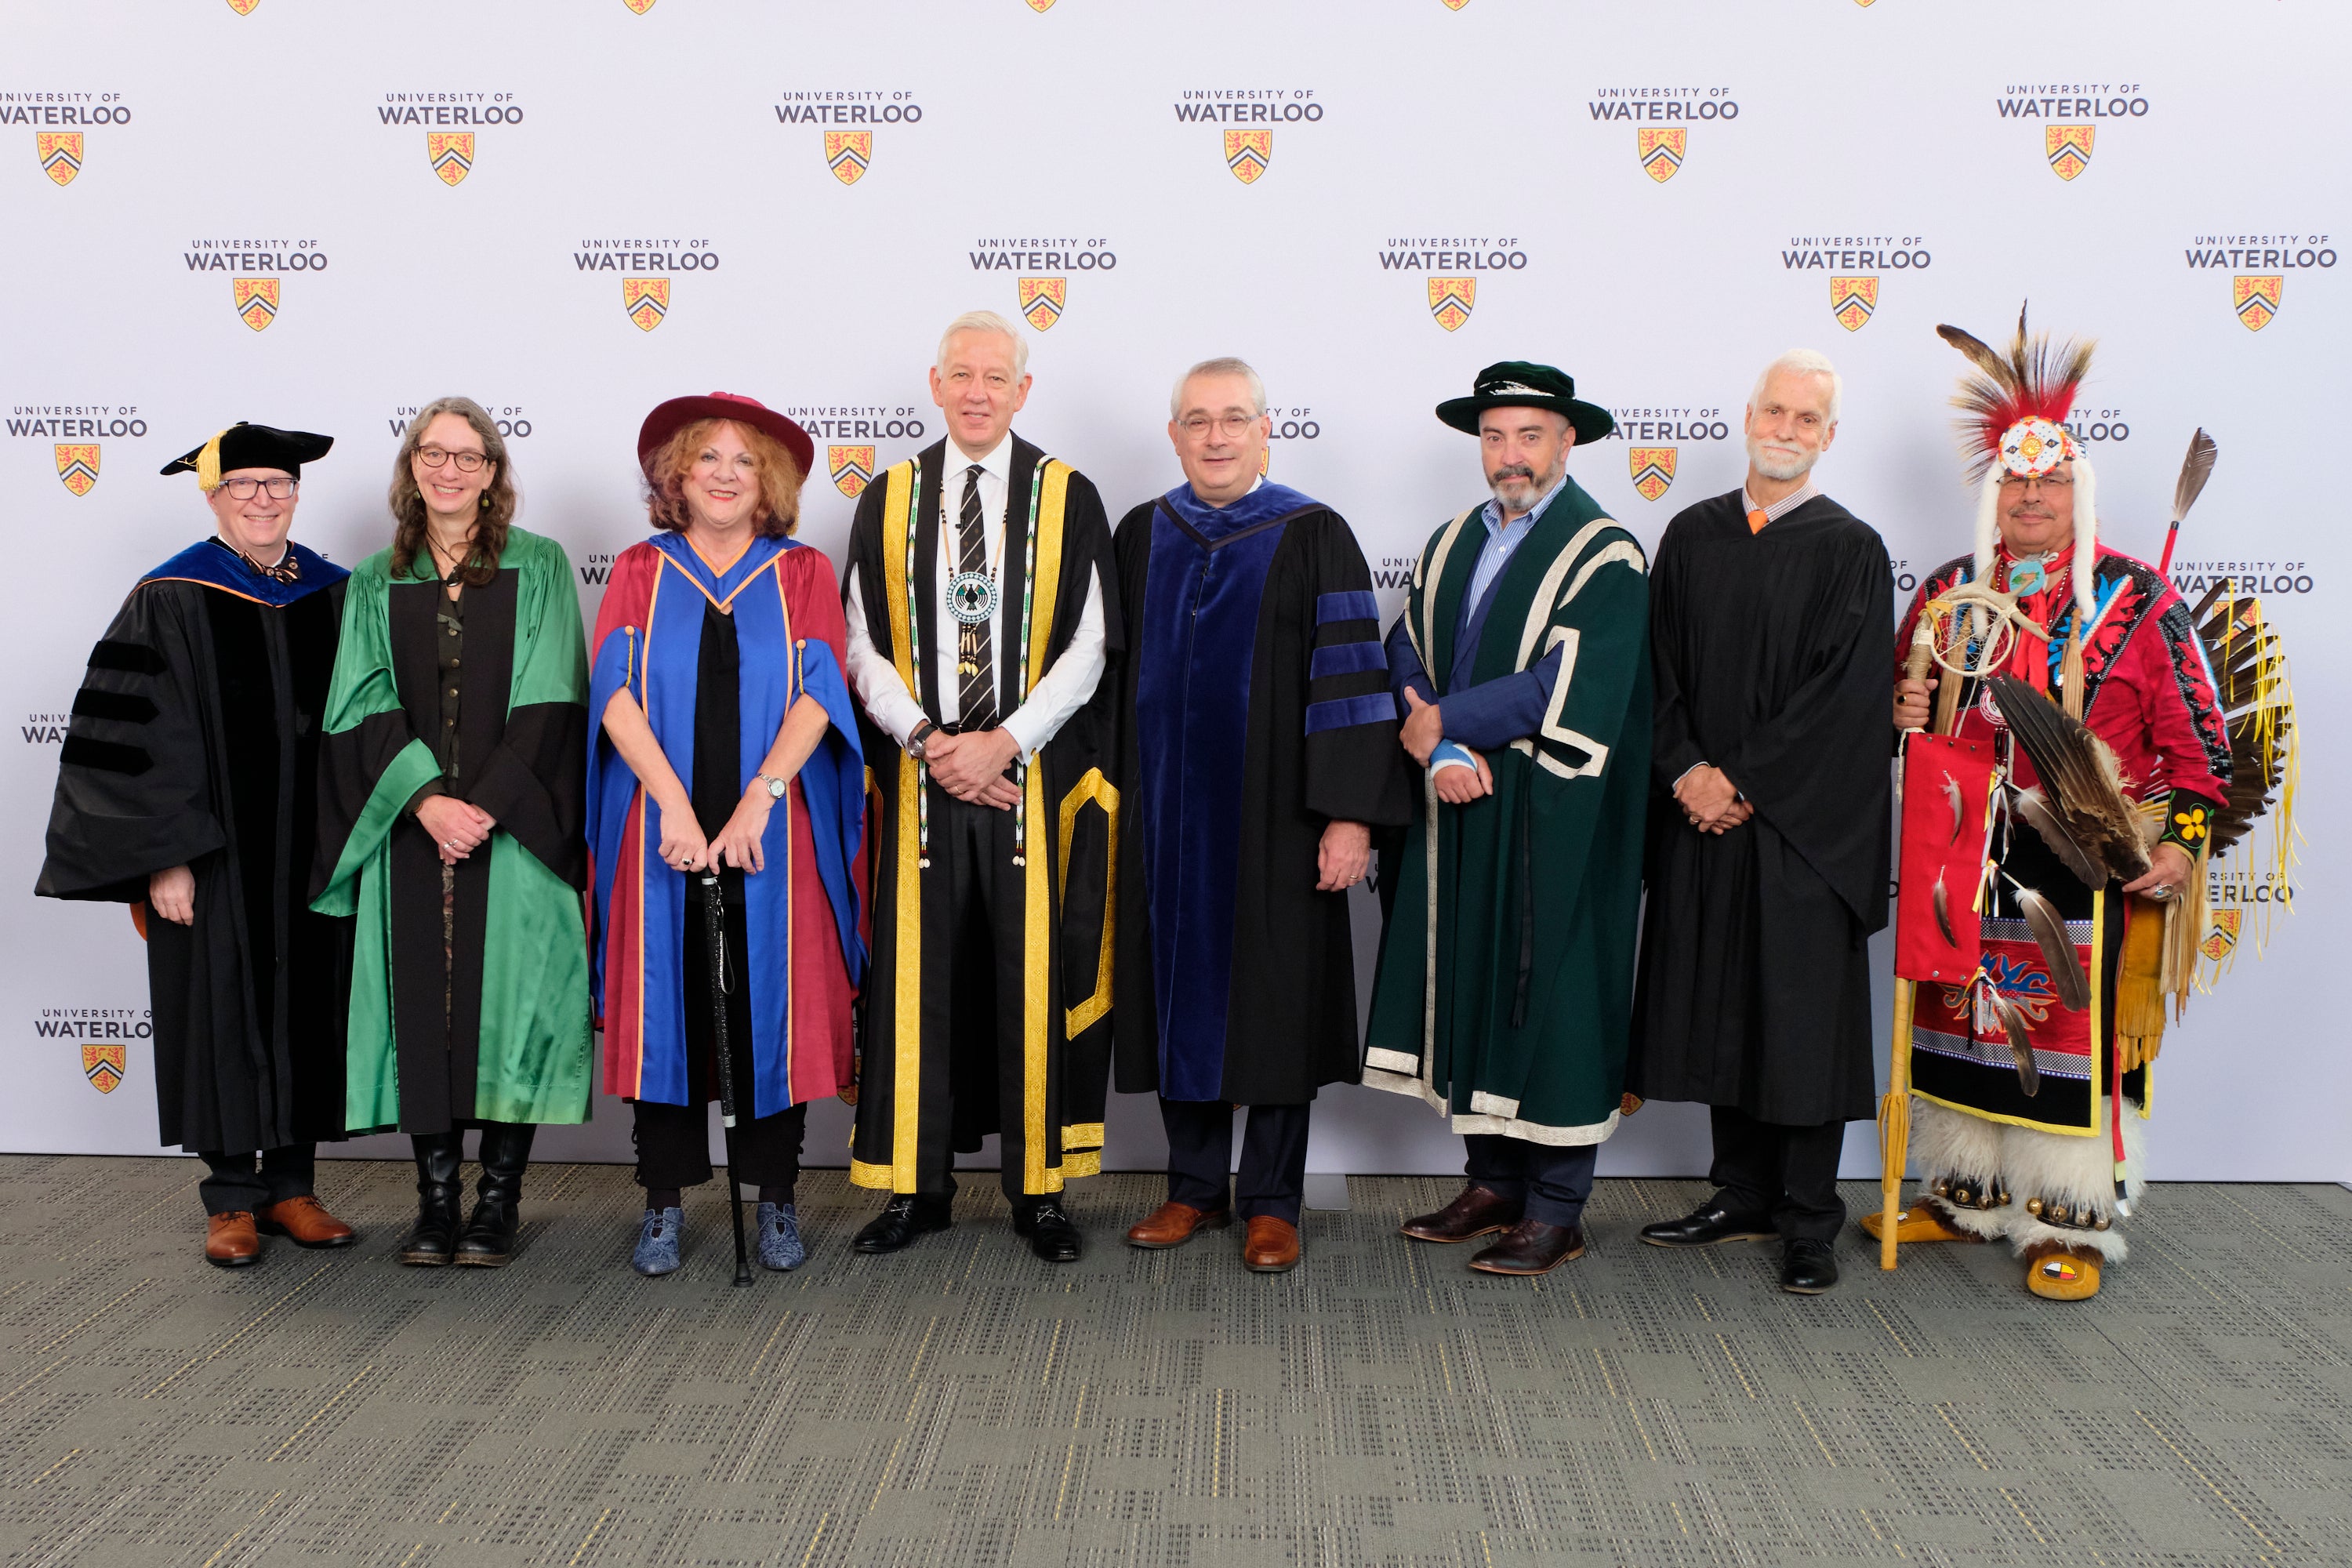 Eight people standing in a row for convocation.